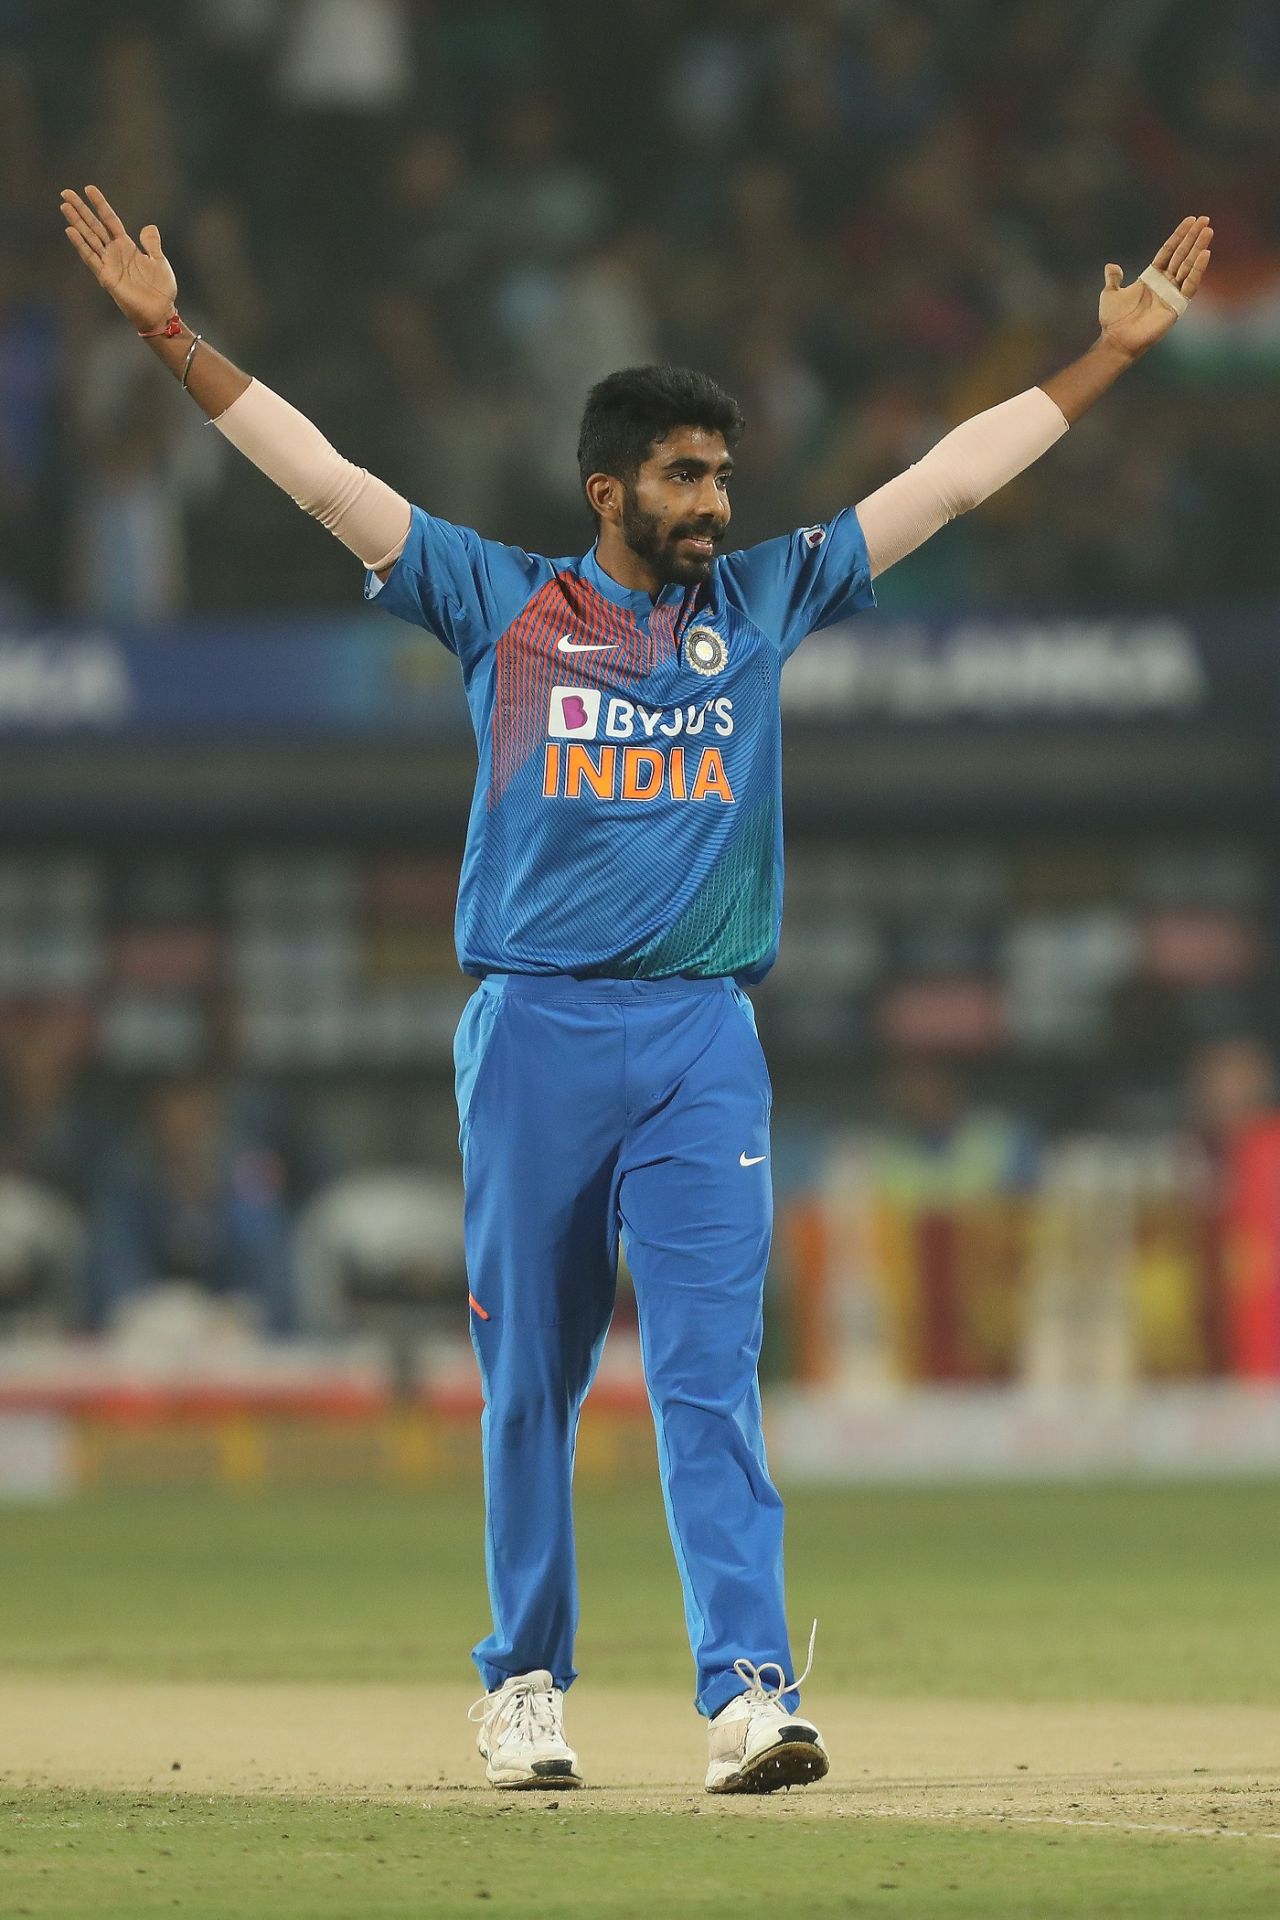 There's no escaping Jasprit Bumrah's early strikes, India v Sri Lanka, 3rd T20I, Pune, January 10, 2020